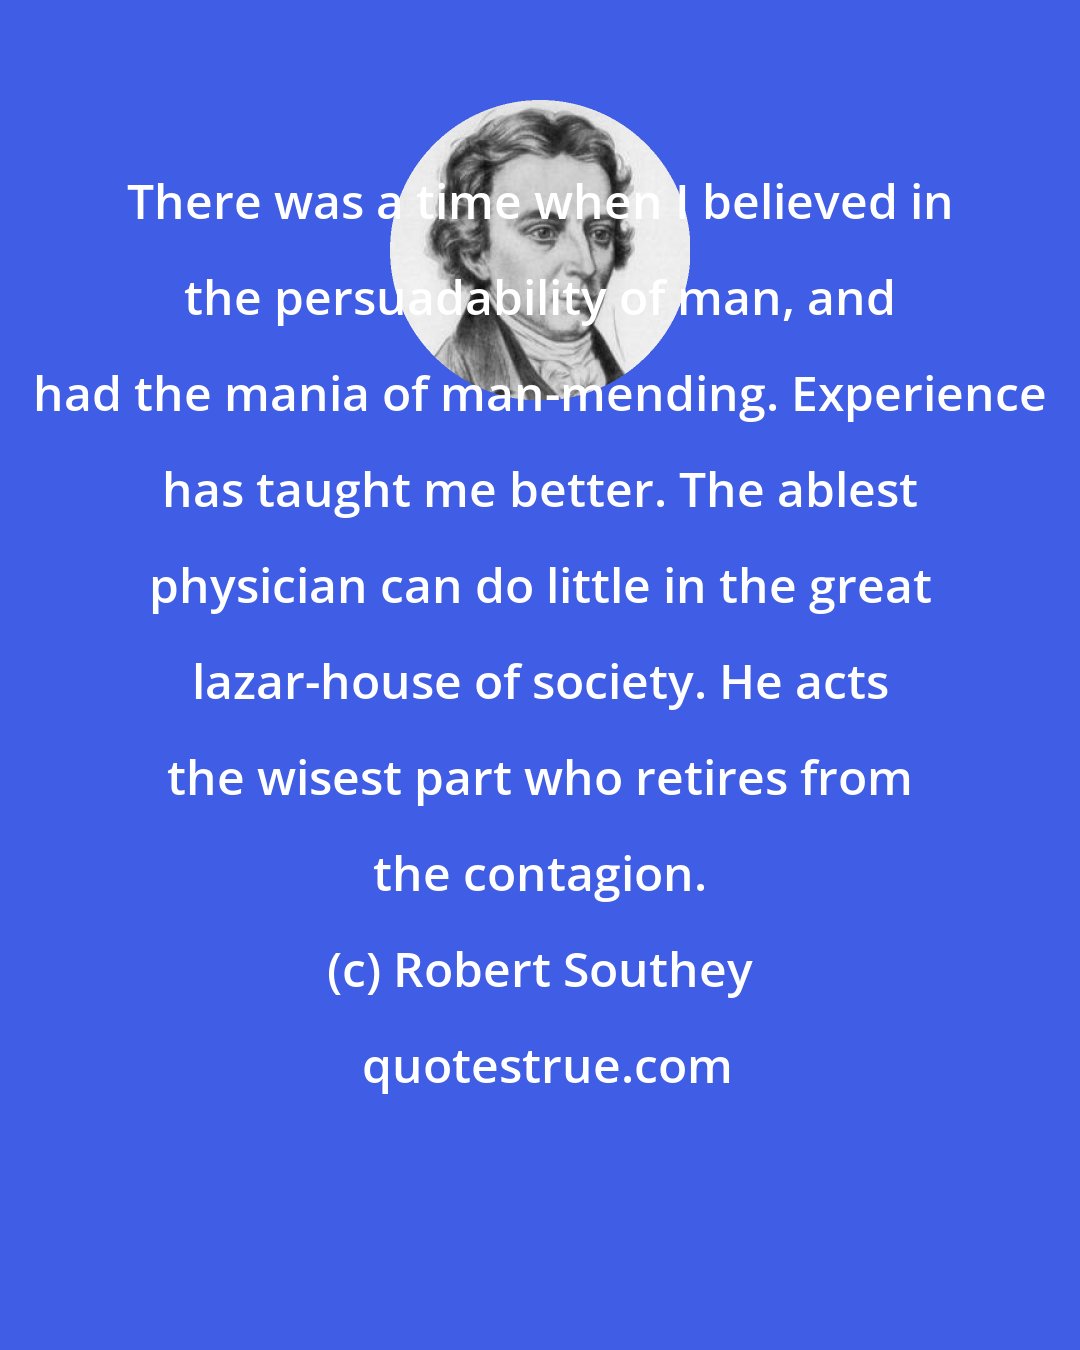 Robert Southey: There was a time when I believed in the persuadability of man, and had the mania of man-mending. Experience has taught me better. The ablest physician can do little in the great lazar-house of society. He acts the wisest part who retires from the contagion.